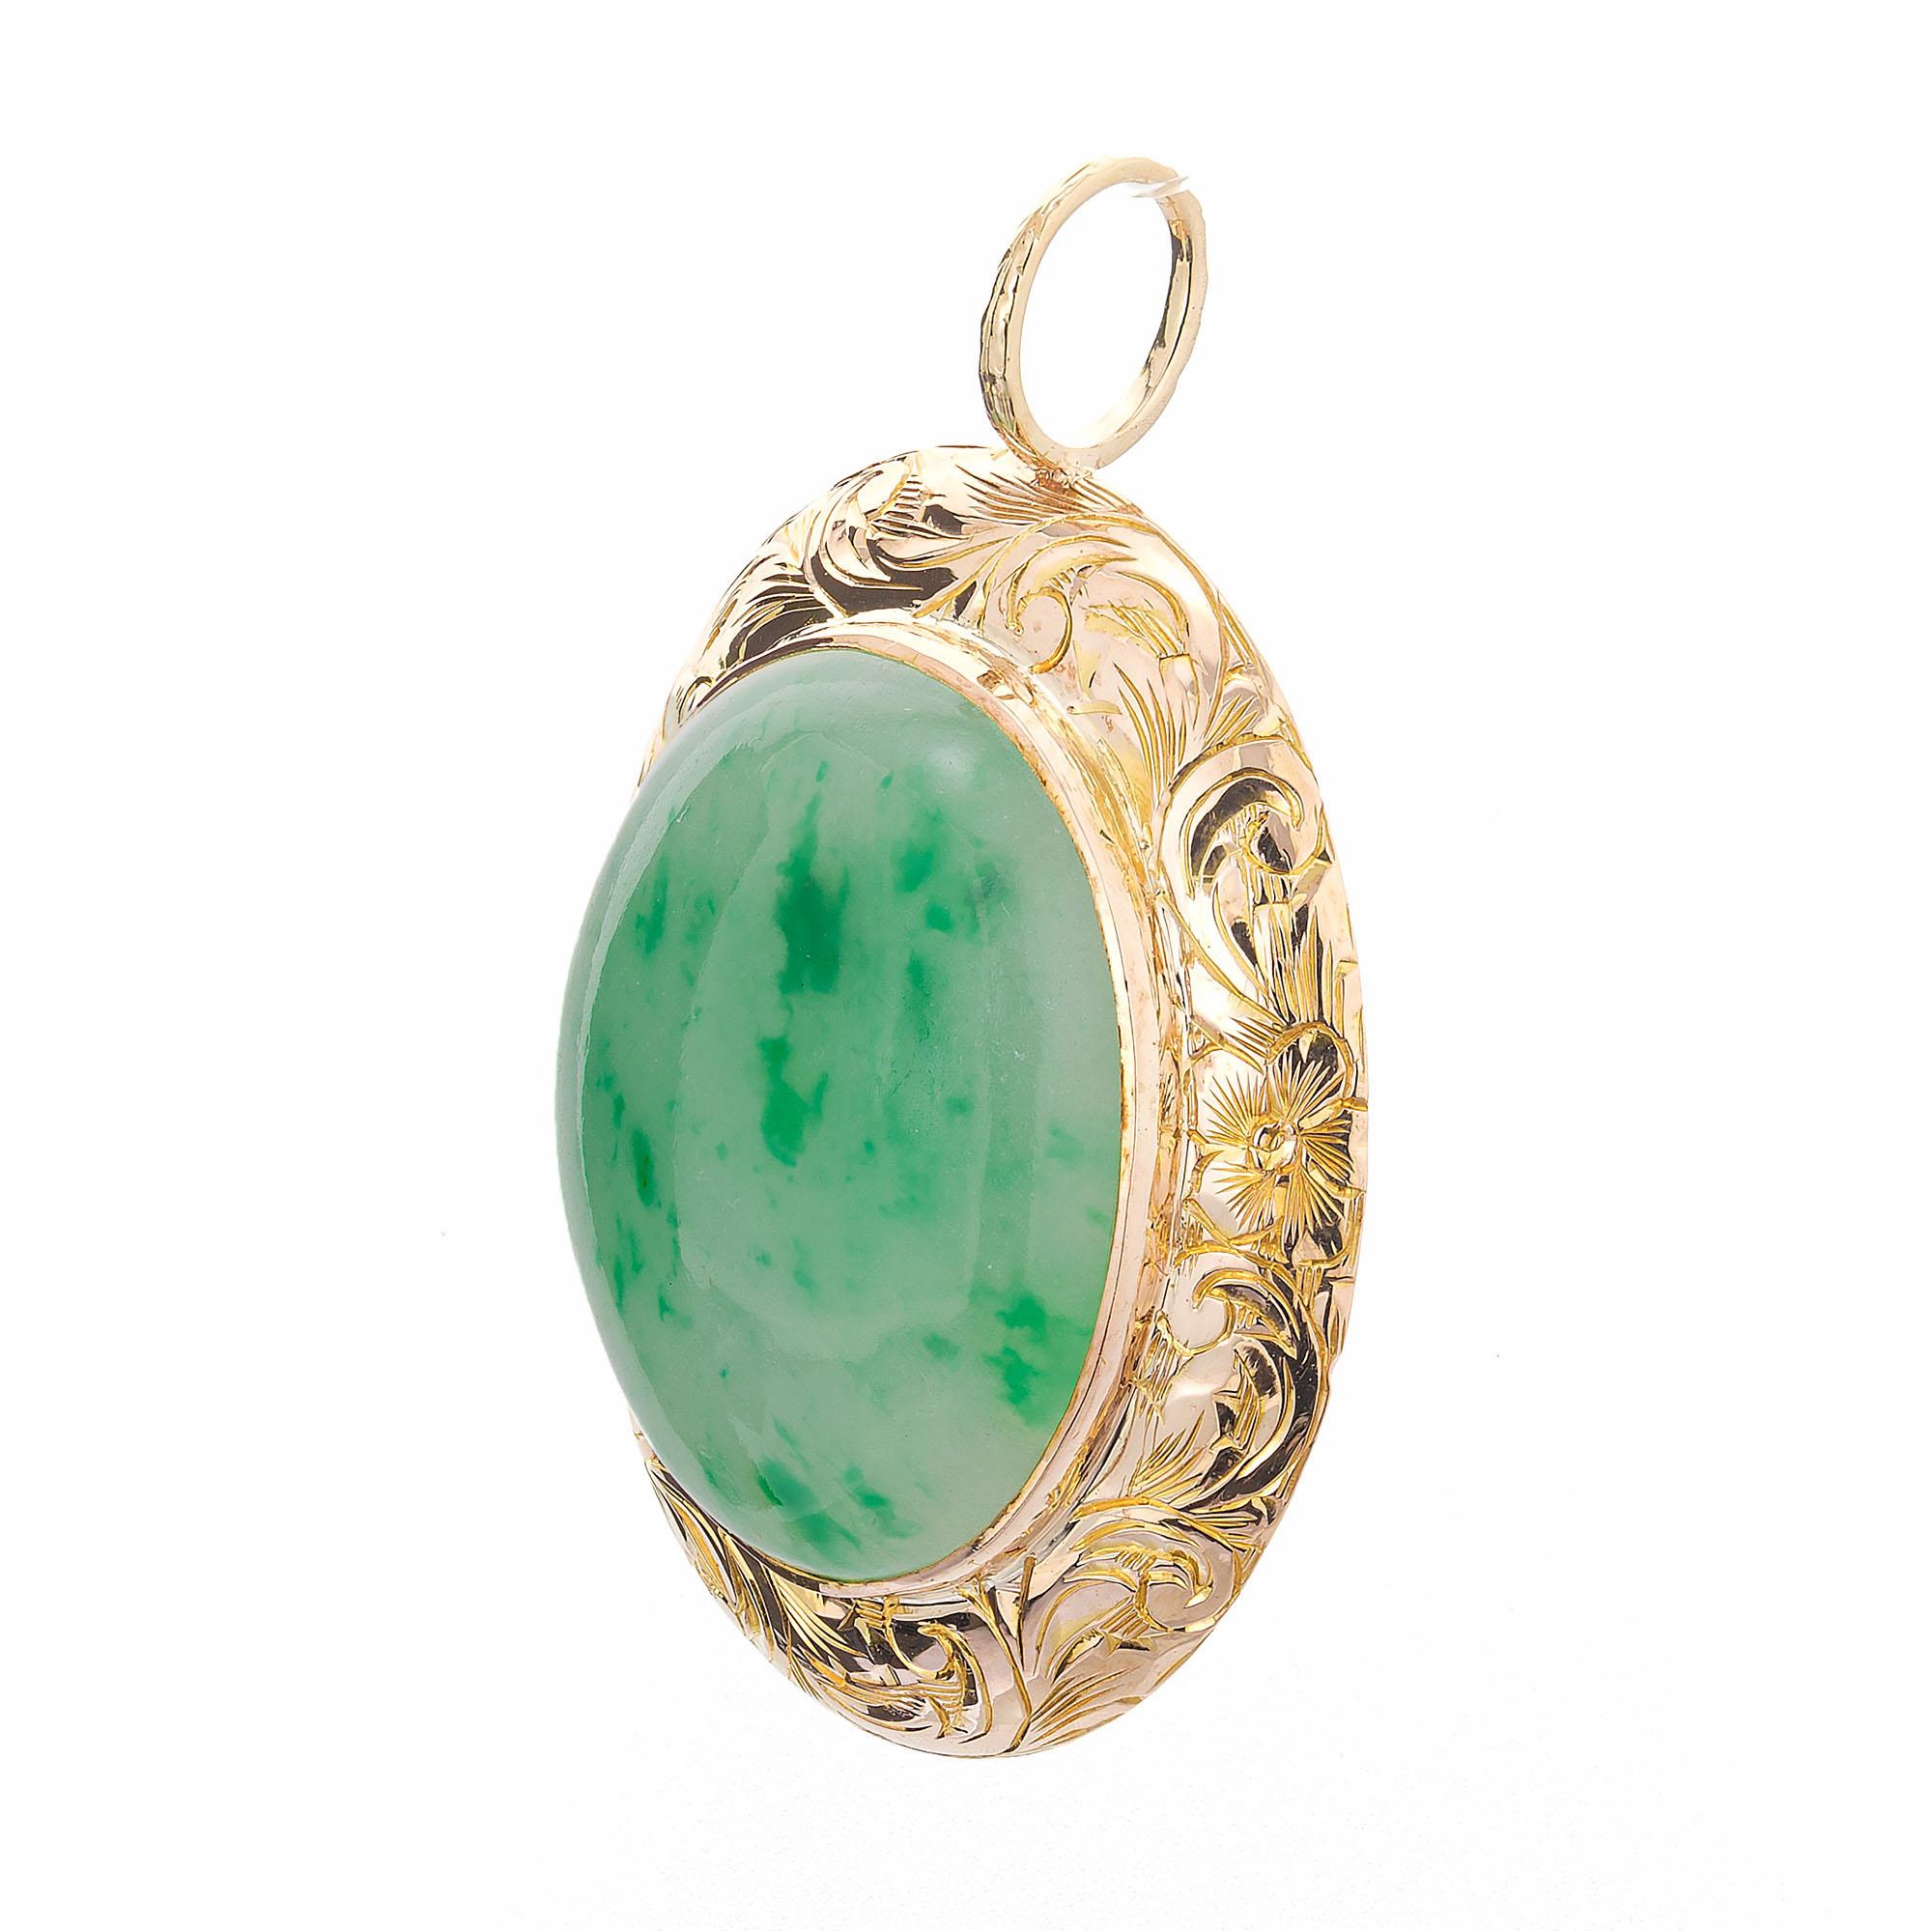 Handmade hand engraved 14k rose gold pendant set with natural untreated GIA certified green and white Jadeite Jade. Circa 1930.

1 oval translucent green and white genuine natural Jadeite Jade, approx. total weight 12.00cts, 19.6 x 15.65 x 5.6mm,